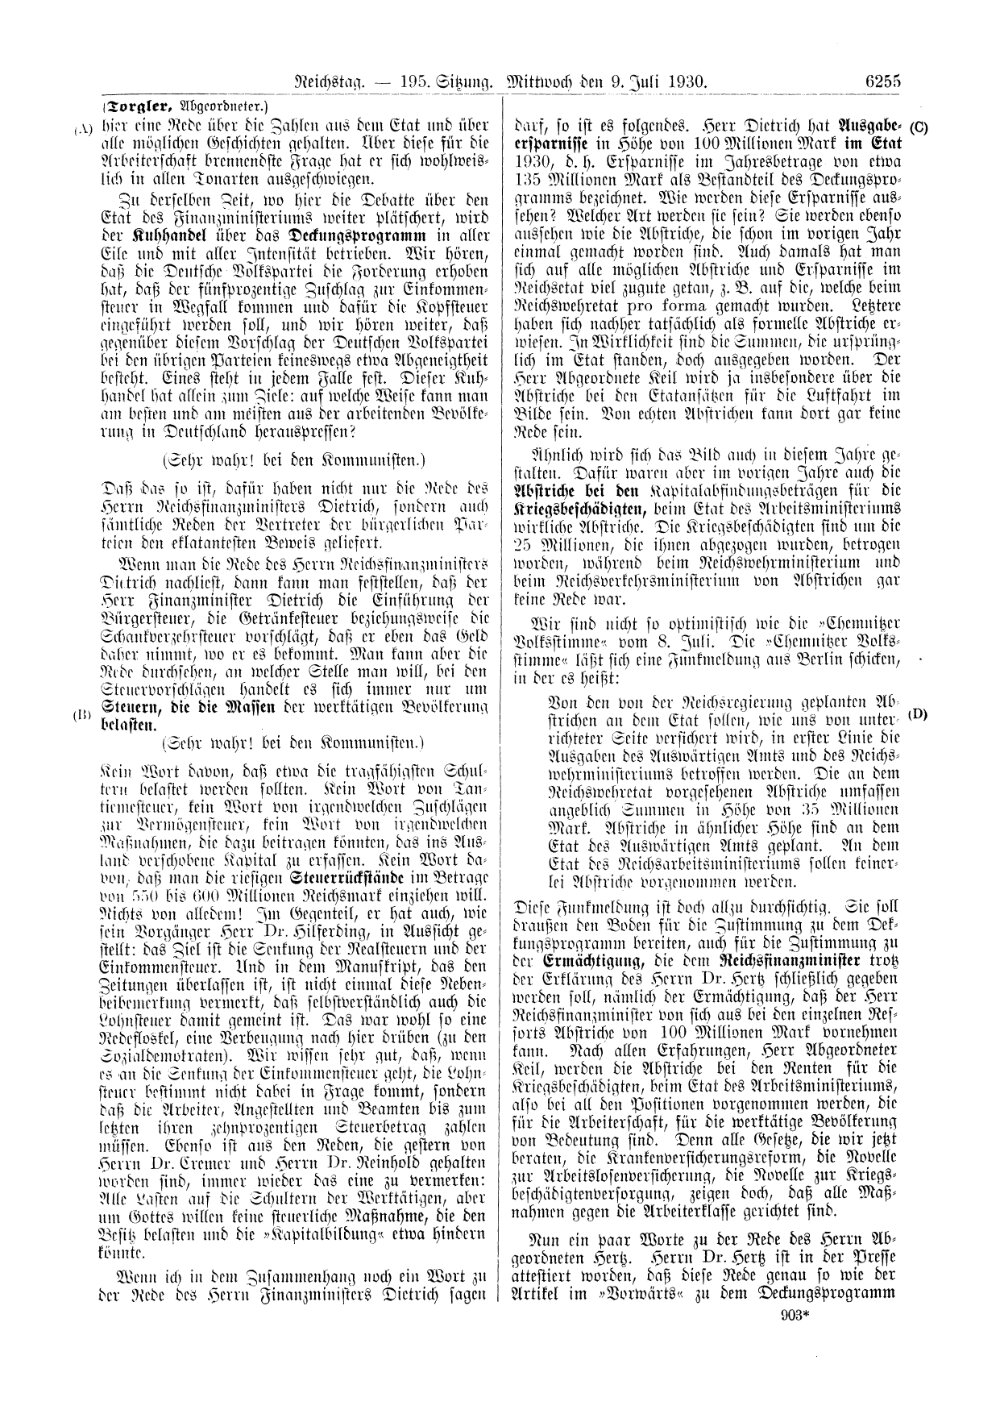 Scan of page 6255